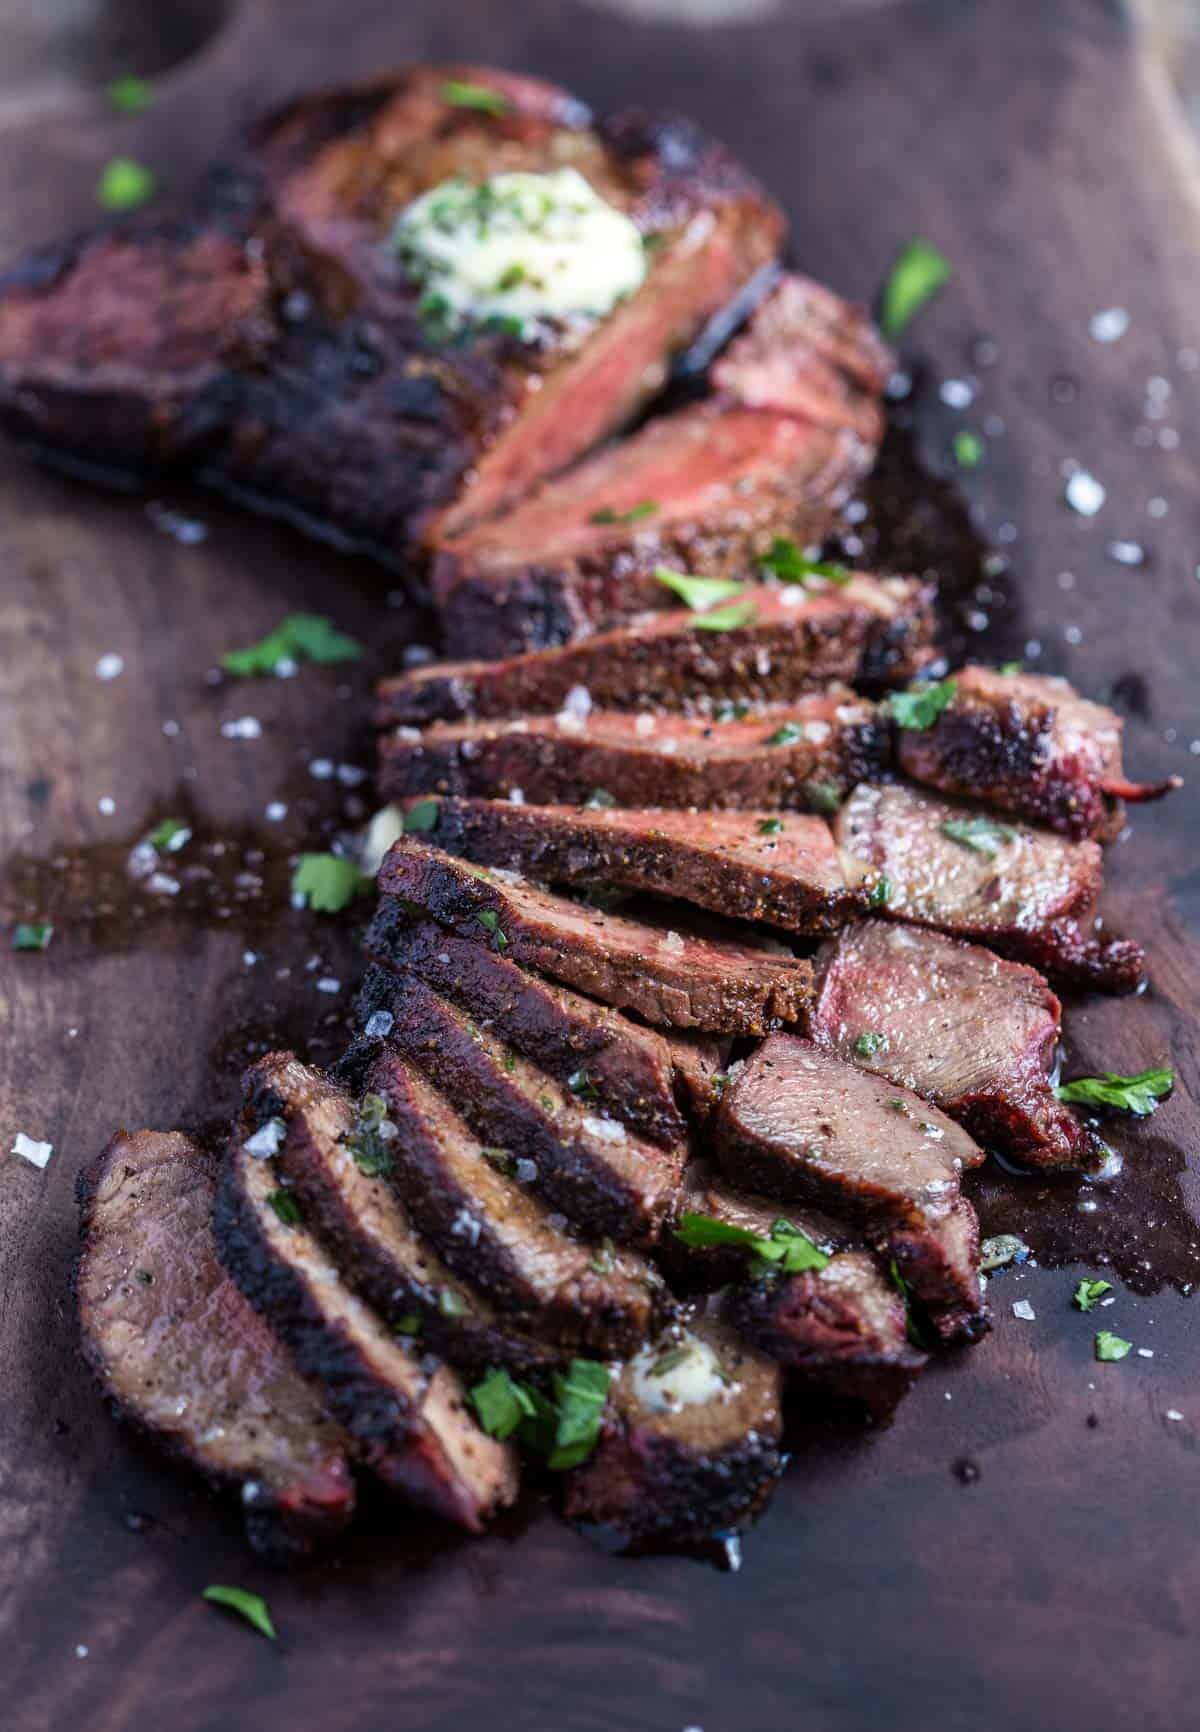 Slices of Grilled Sirloin Steak on a cutting board